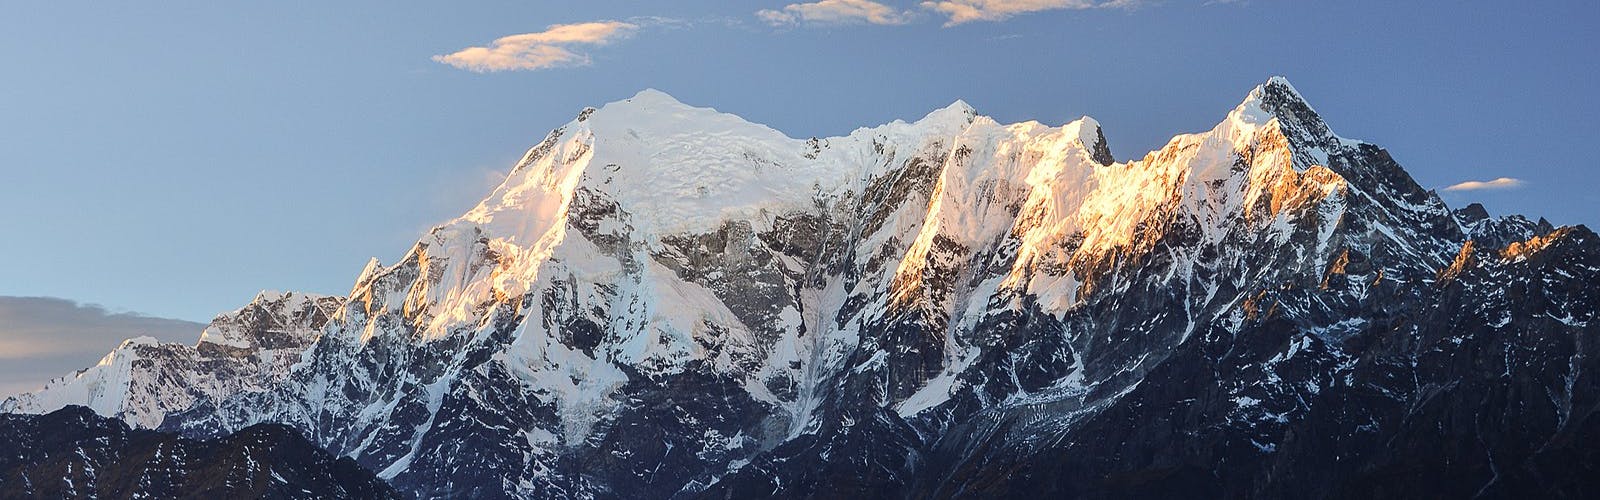 Himalayan peaks topped with snow against a pale blue sky.